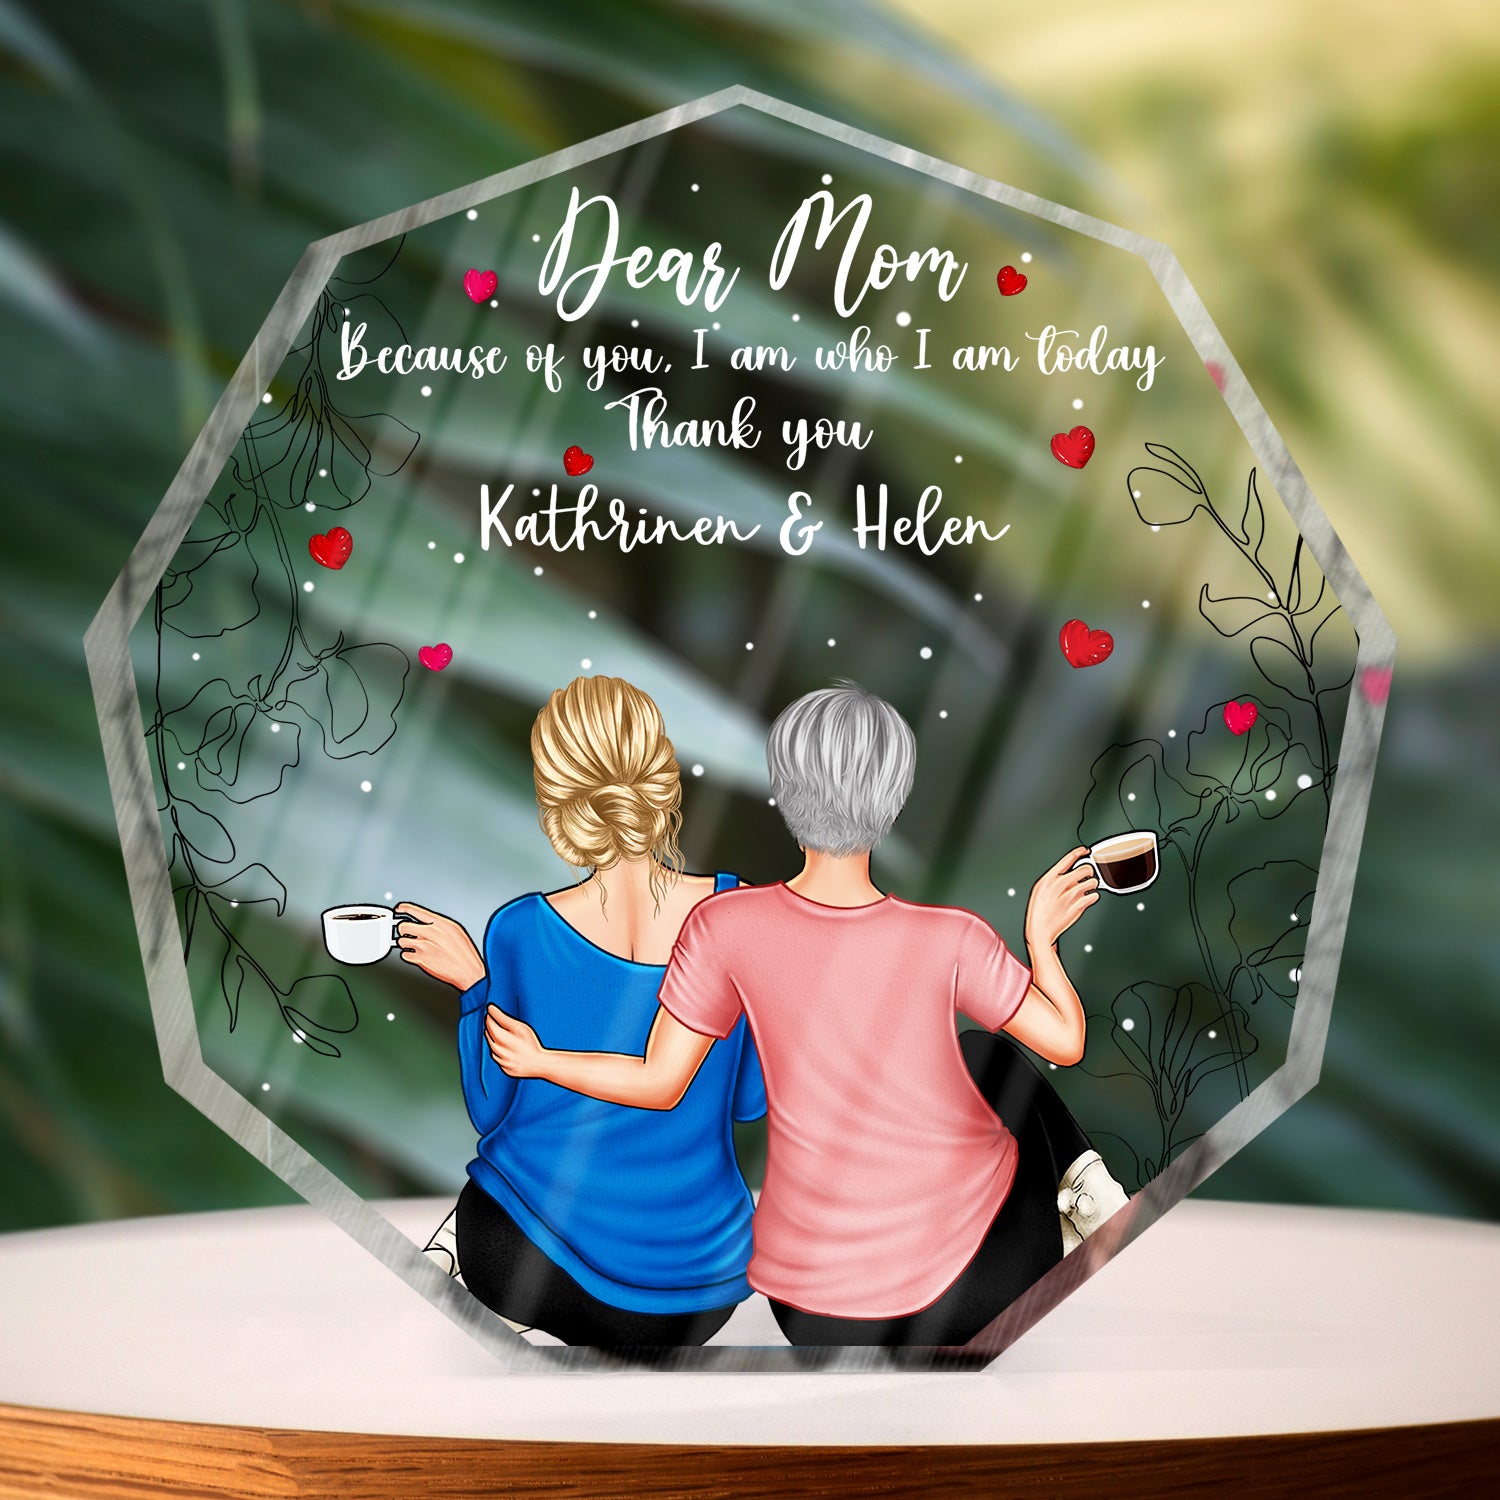 I Am Who I Am Today - Gift For Mother - Personalized Nonagon Shaped Acrylic Plaque